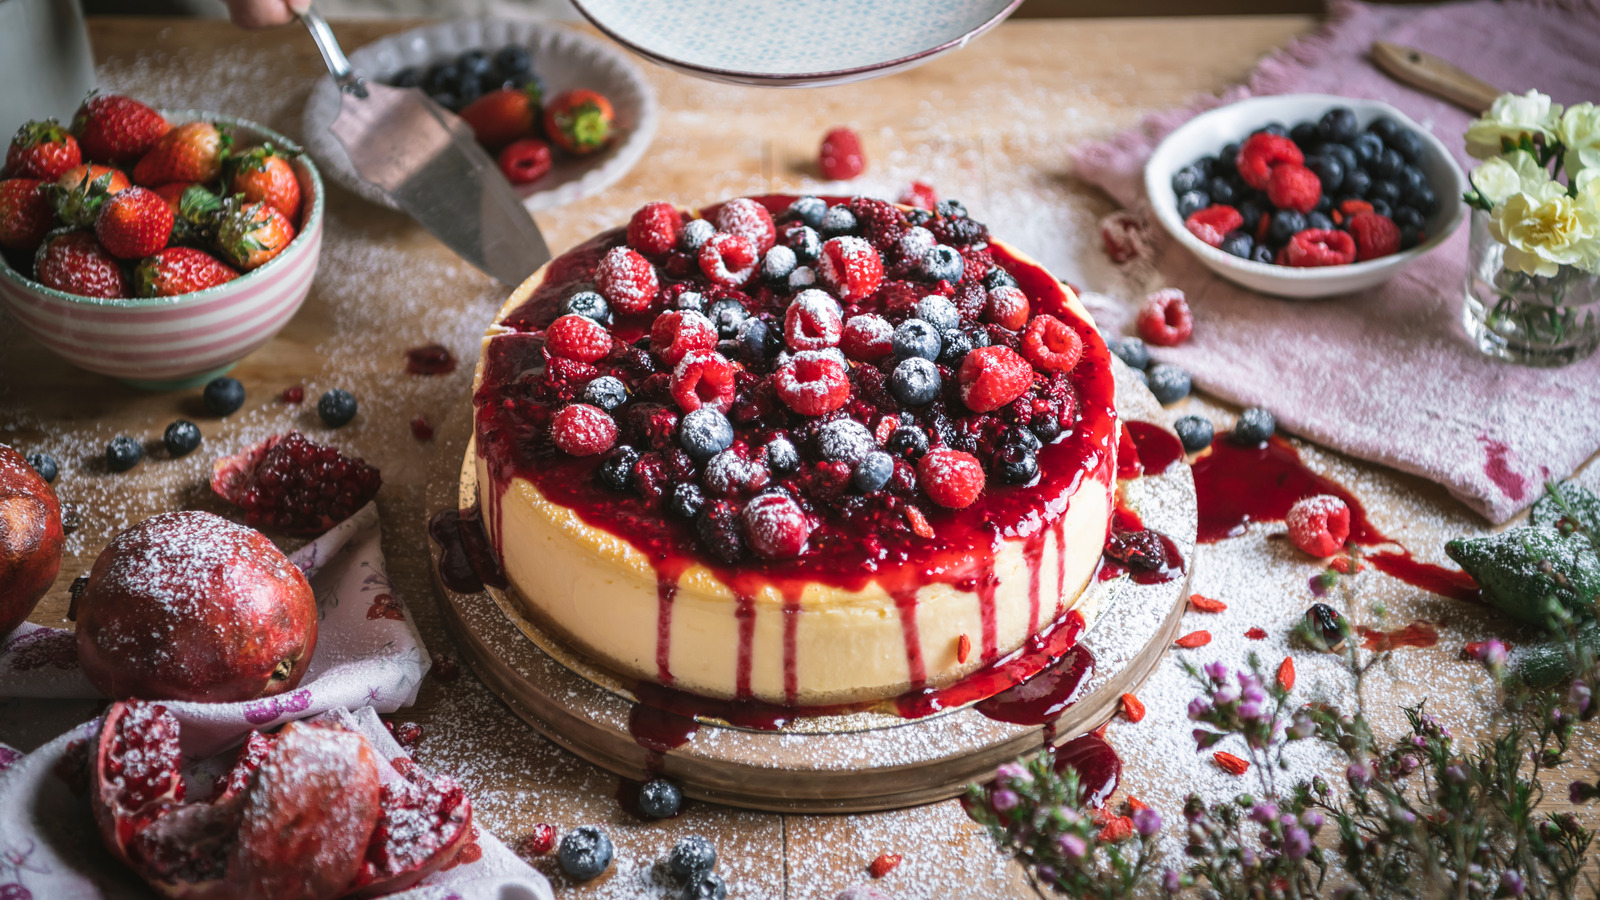 https://www.tastingtable.com/img/gallery/14-tips-you-need-to-bake-the-perfect-cheesecake/l-intro-1672338239.jpg